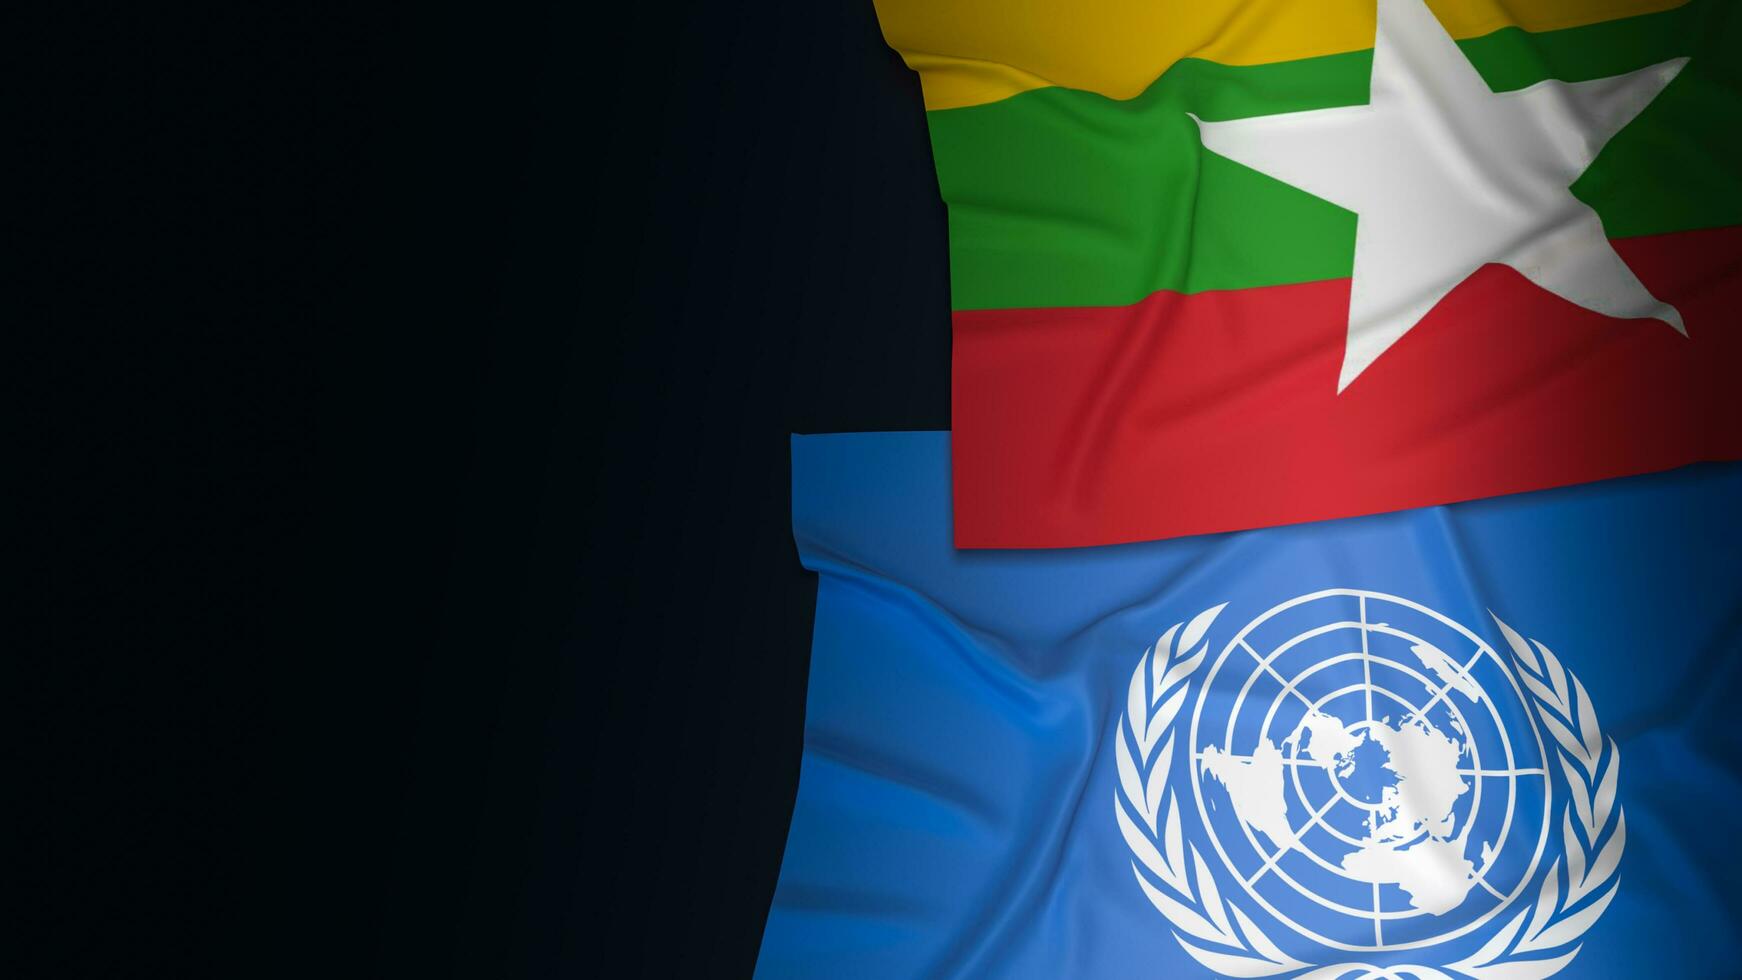 The Myanmar and un  flag for editorial background content 3d rendering photo